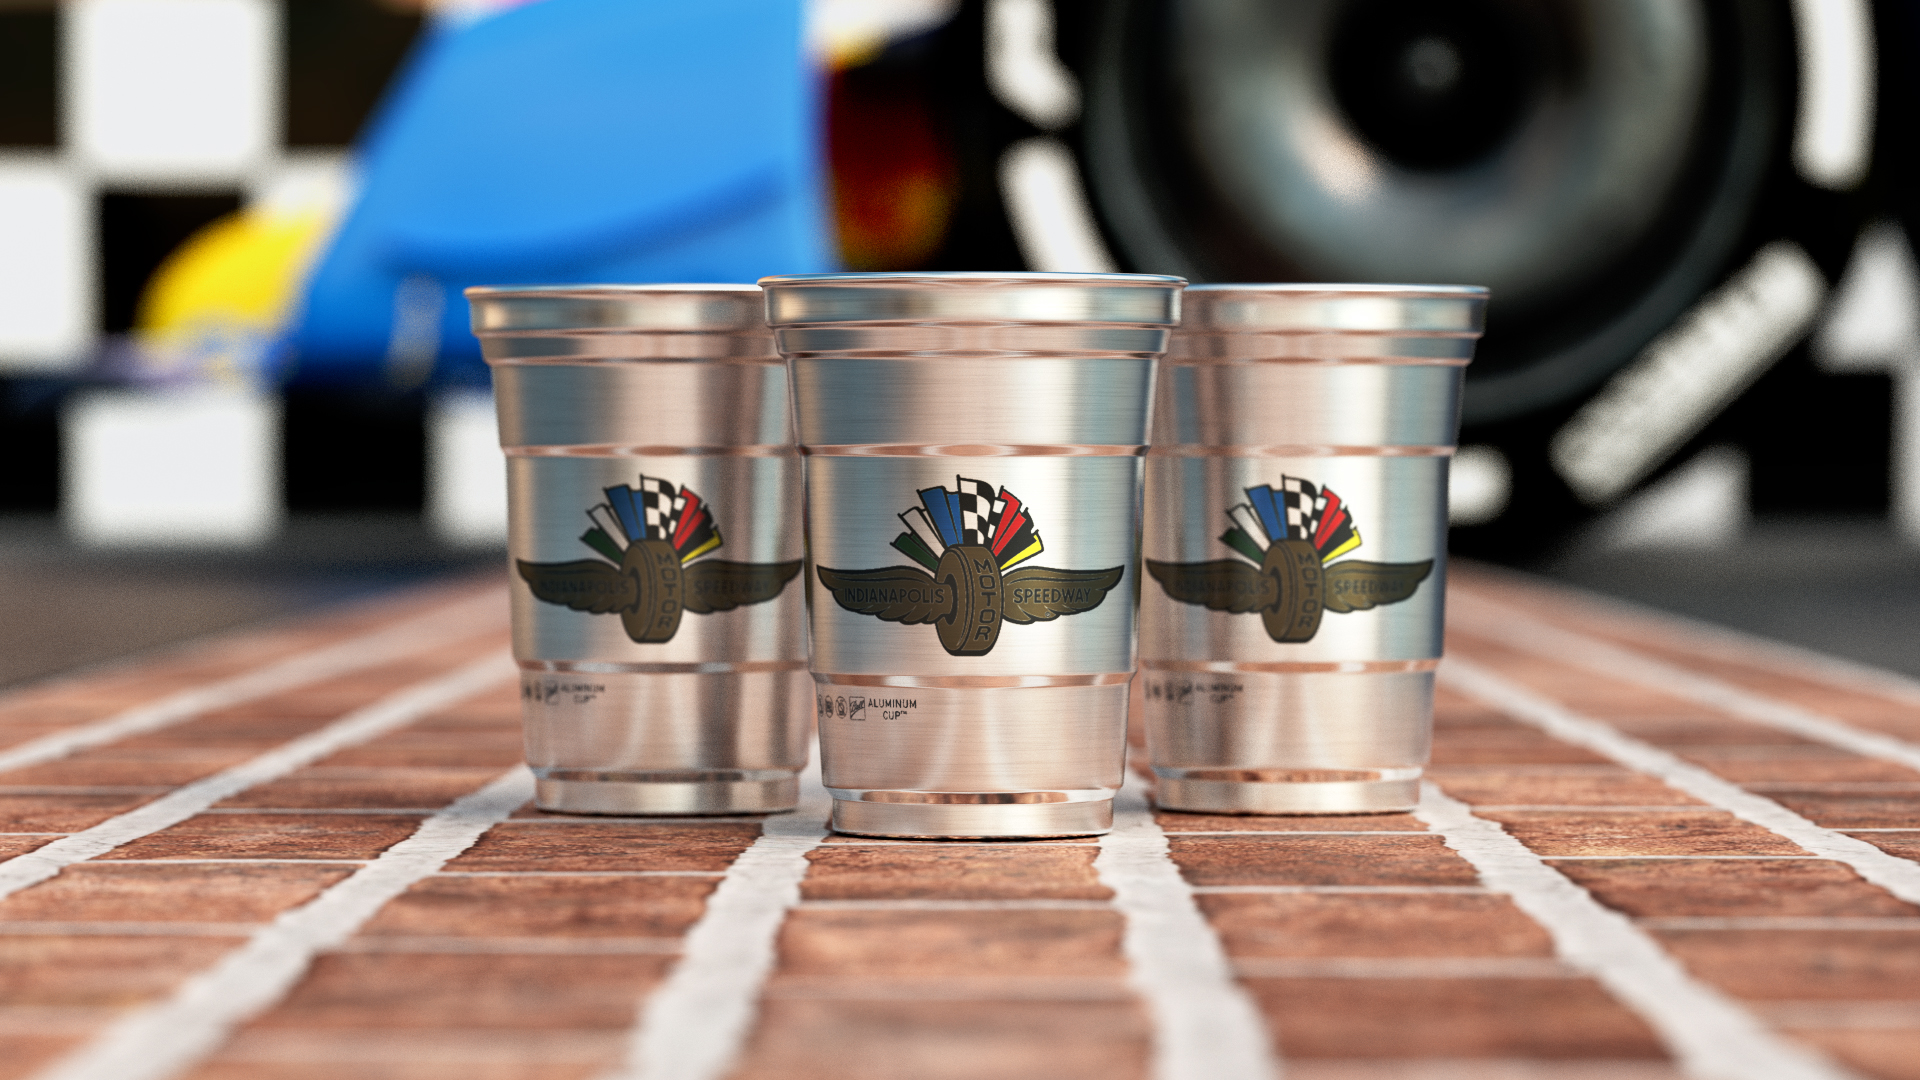 Ball Aluminum Cup - Our rollout of the Ball Aluminum Cup™ is